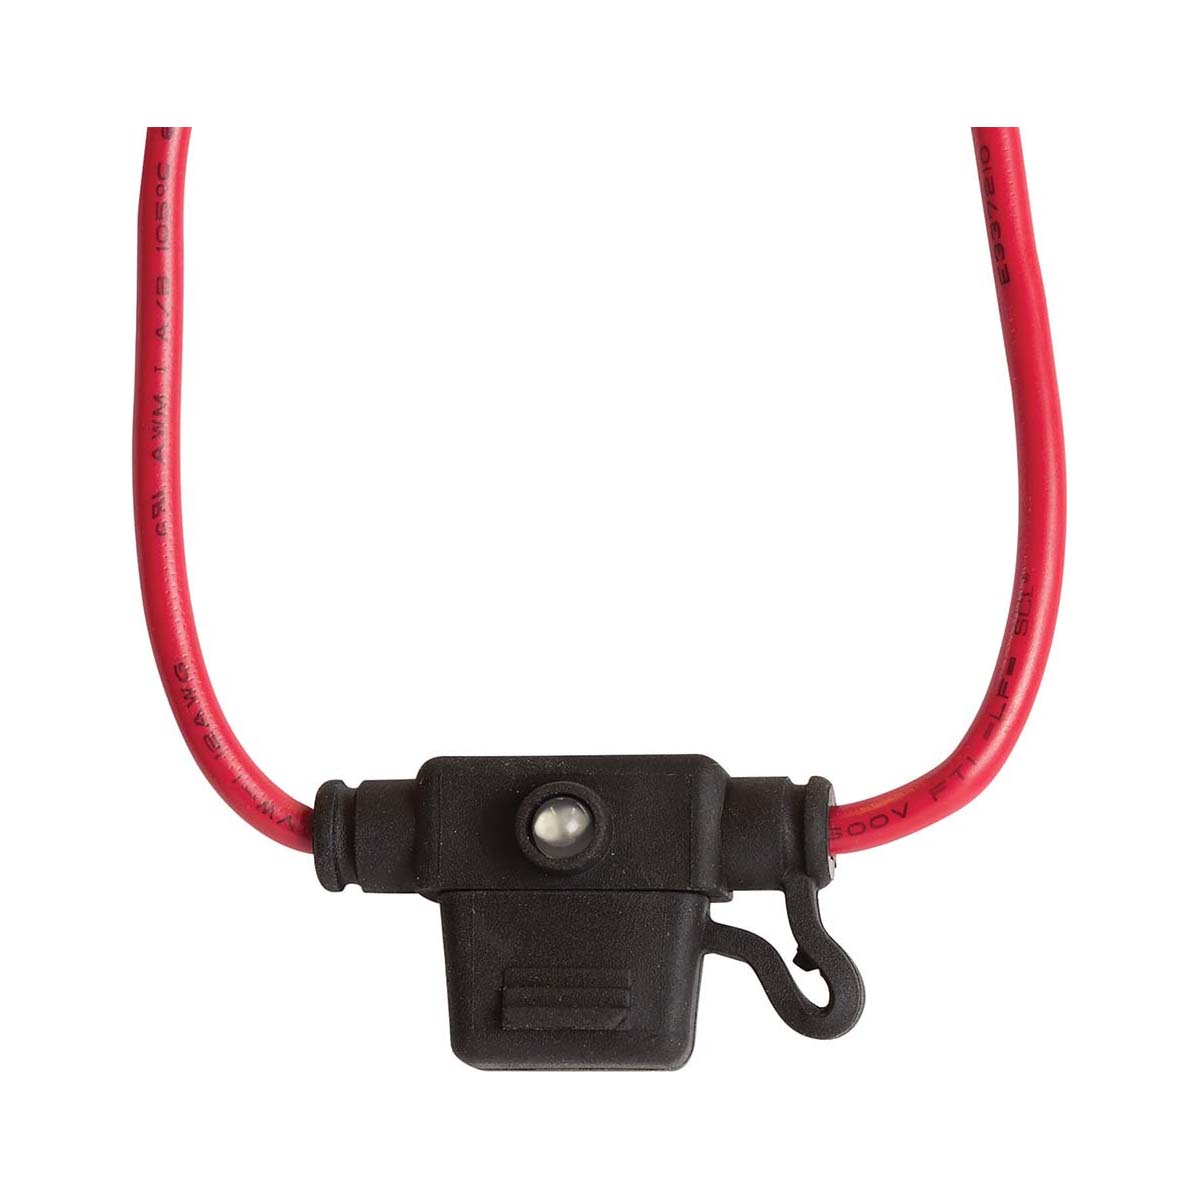 KT Cables Blade Fuse Holder with Indicator